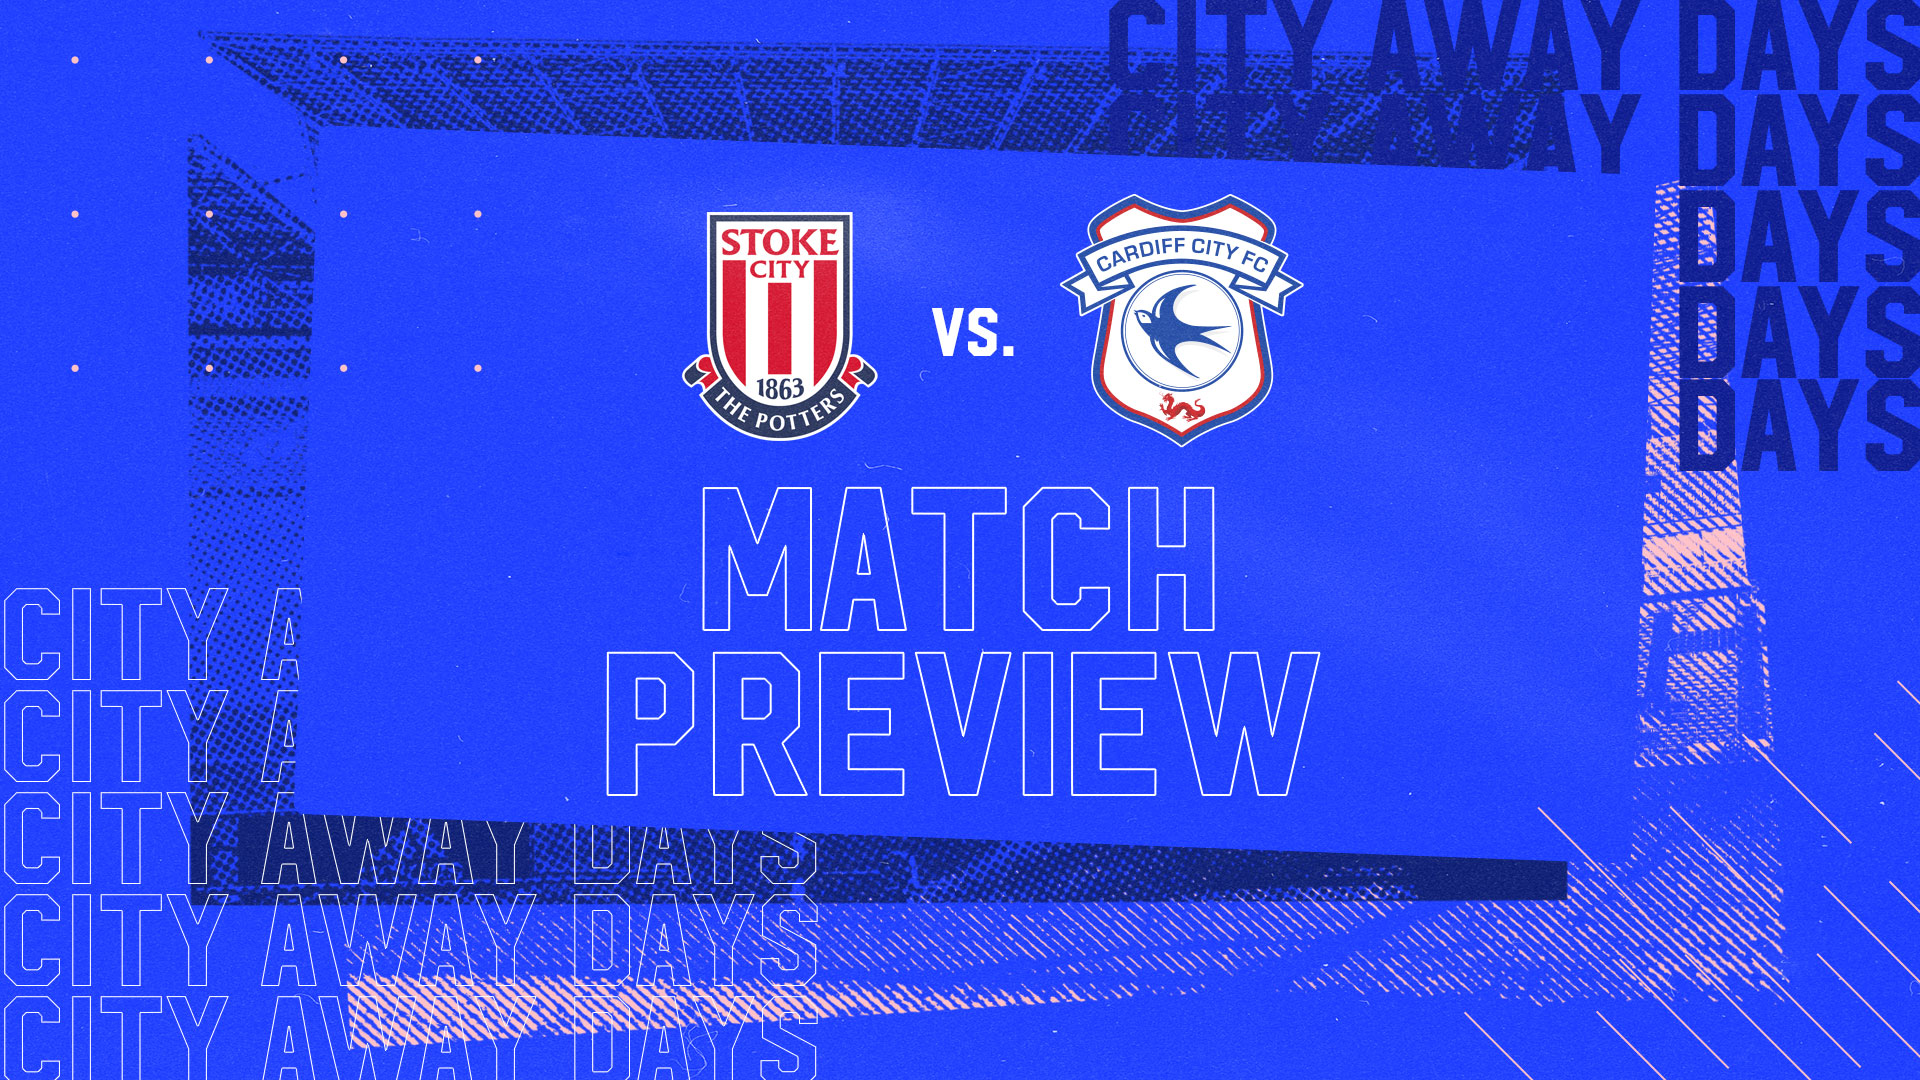 Stoke City host the Bluebirds this weekend...